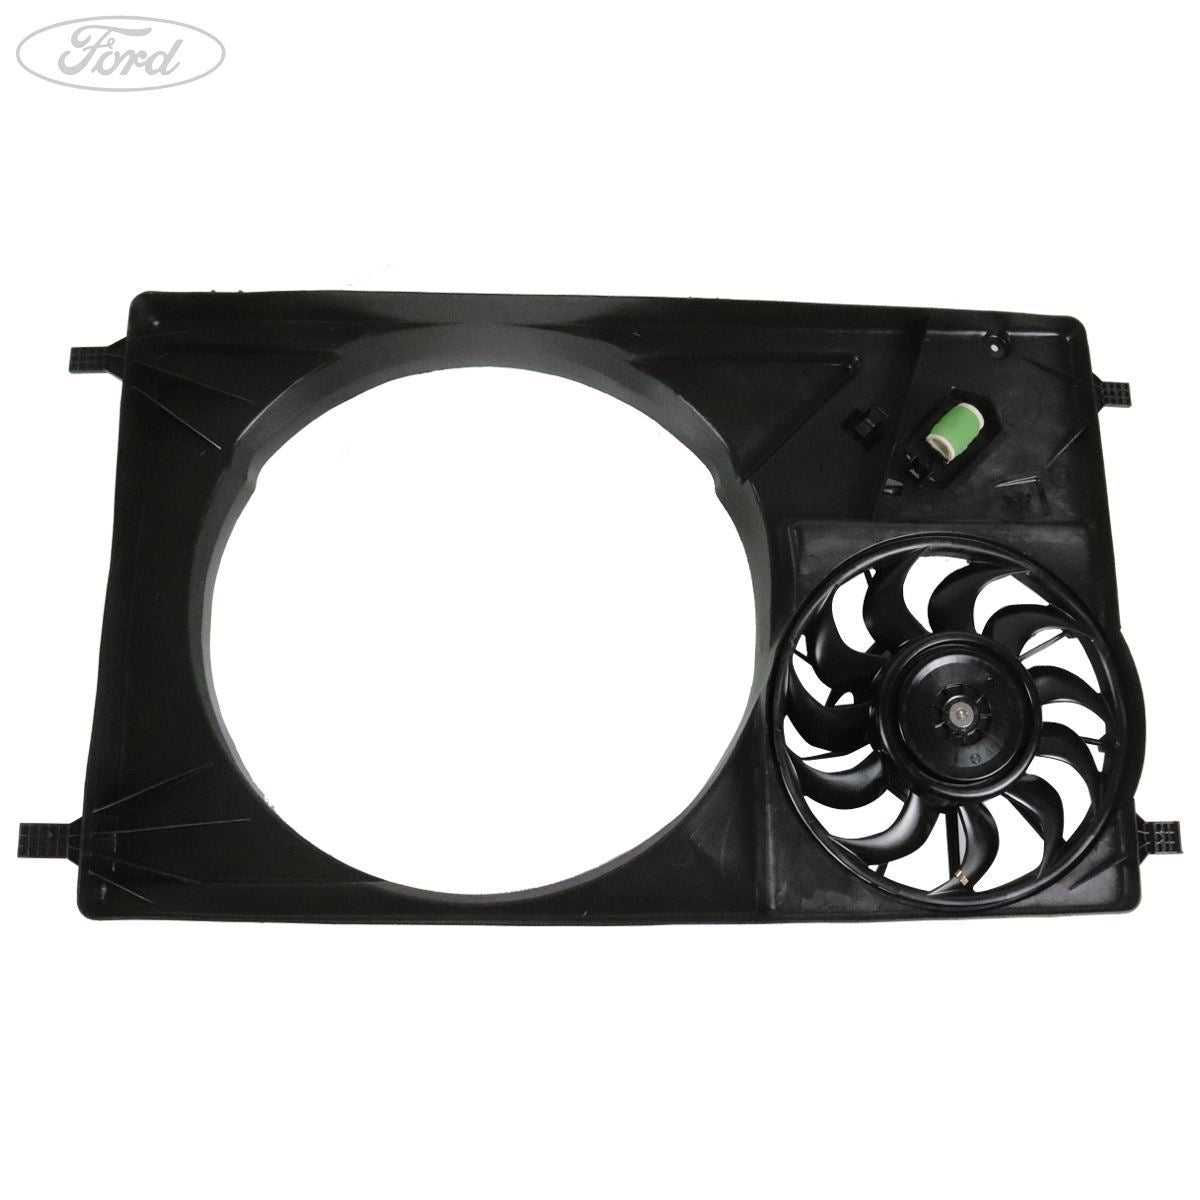 Ford, TRANSIT RADIATOR COWLING WITH SMALL FAN 4WD RWD